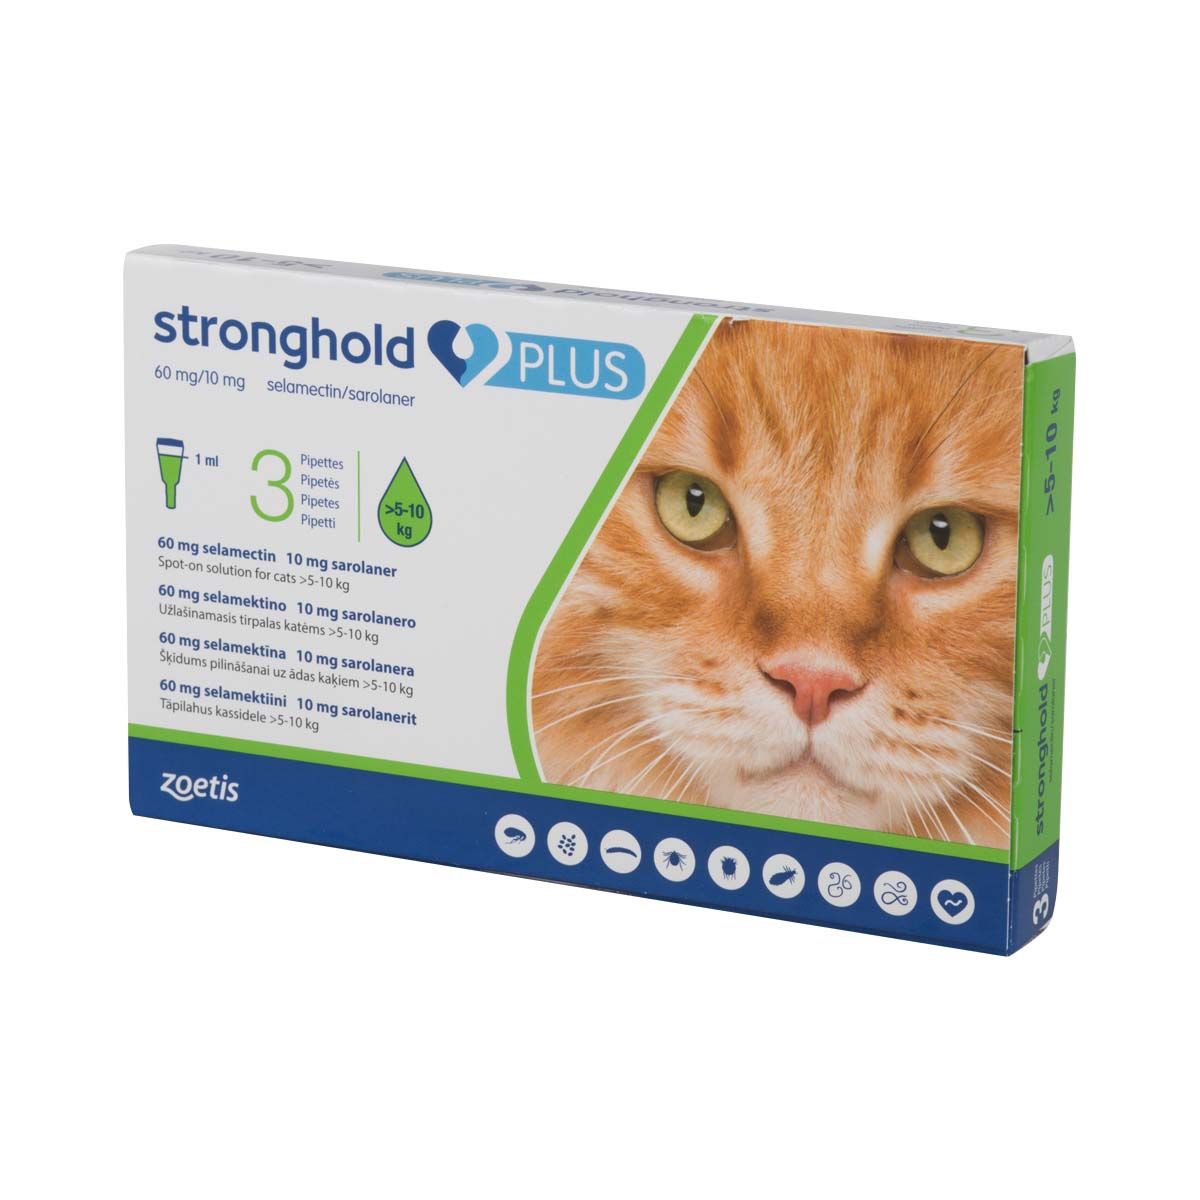 Stronghold Plus for Cats 11.1 22 lbs 3 tubes 37.00 Heartworm